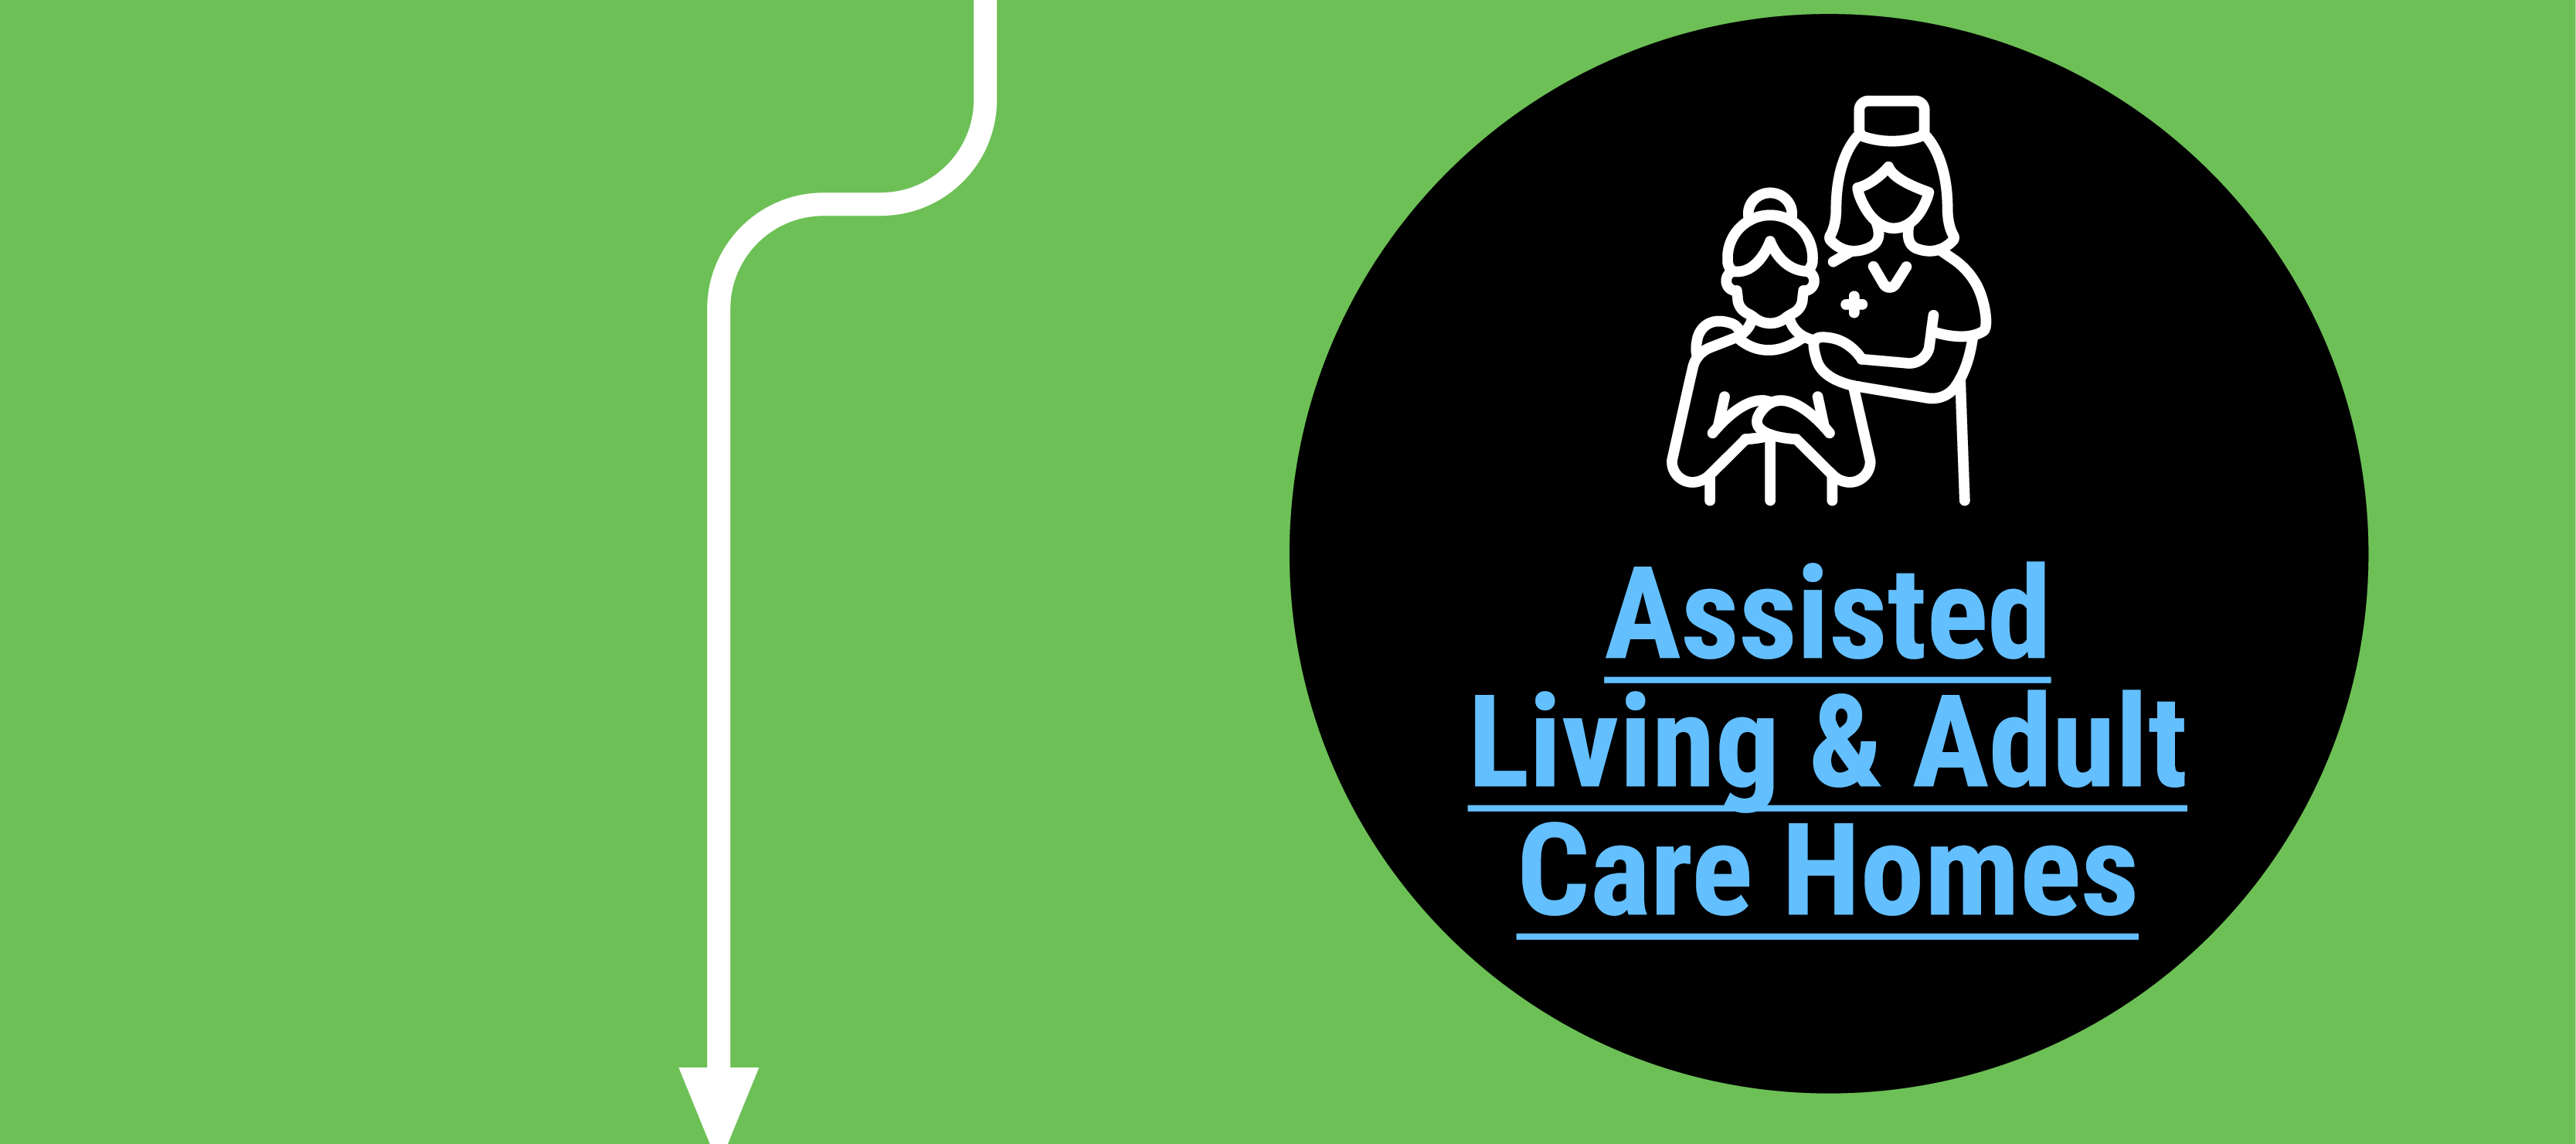 Assisted Living & Adult Care Homes